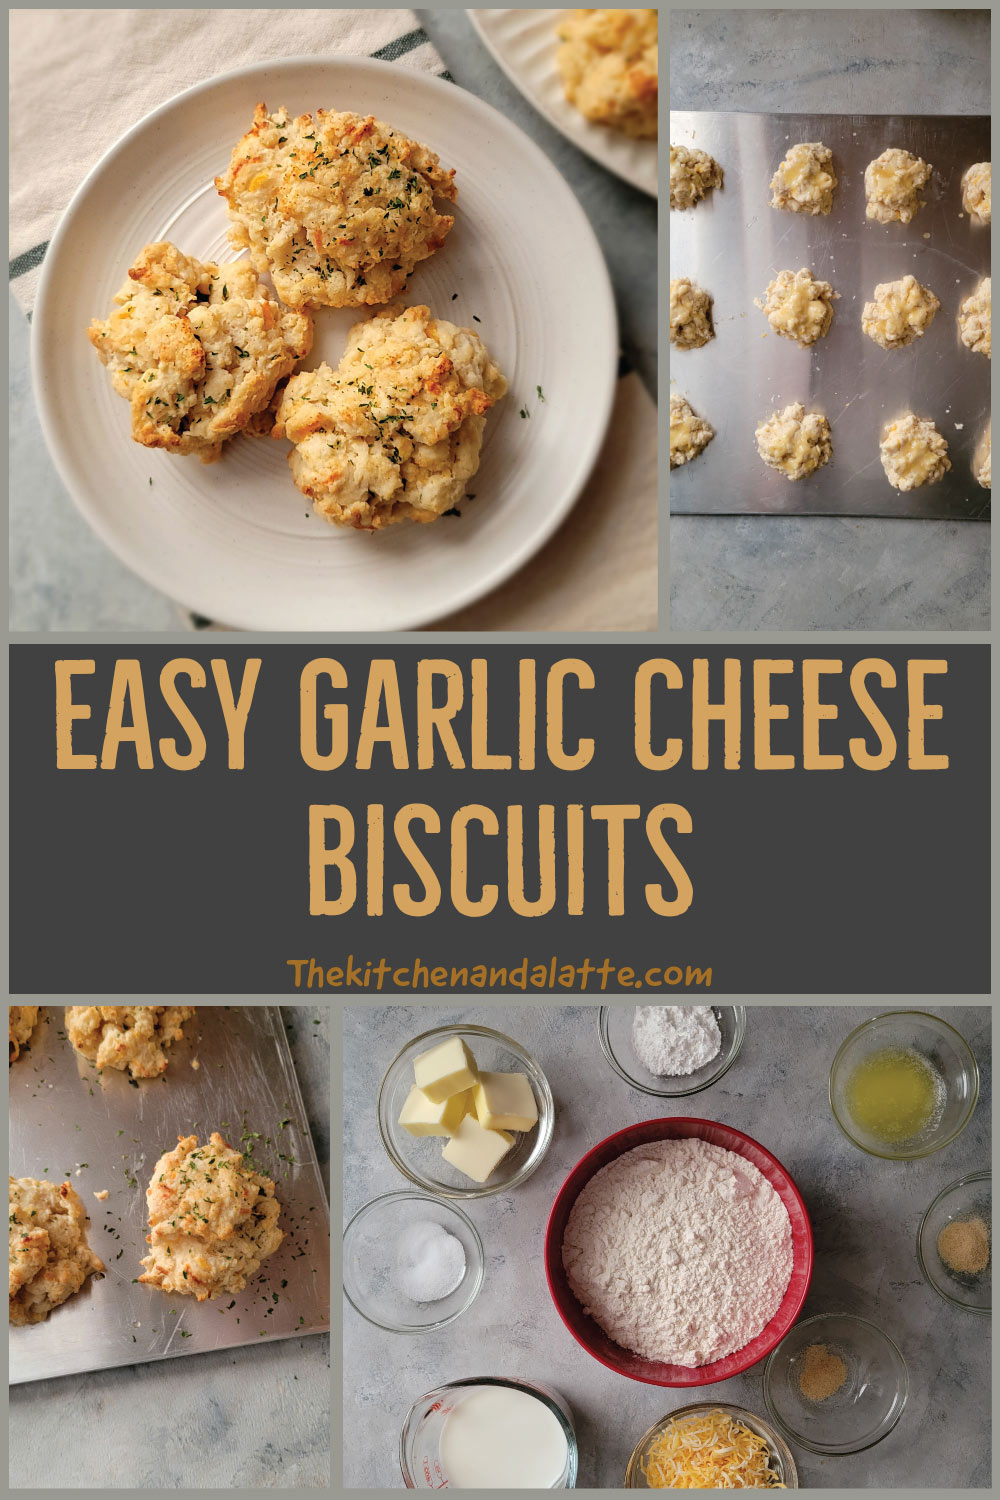 Easy garlic cheese biscuits Pinterest graphic. Images include - ingredients in prep bowls, biscuits on baking sheet after garnishing with parsley, biscuits on baking sheet before baking and 3 biscuits on a plate ready to eat.